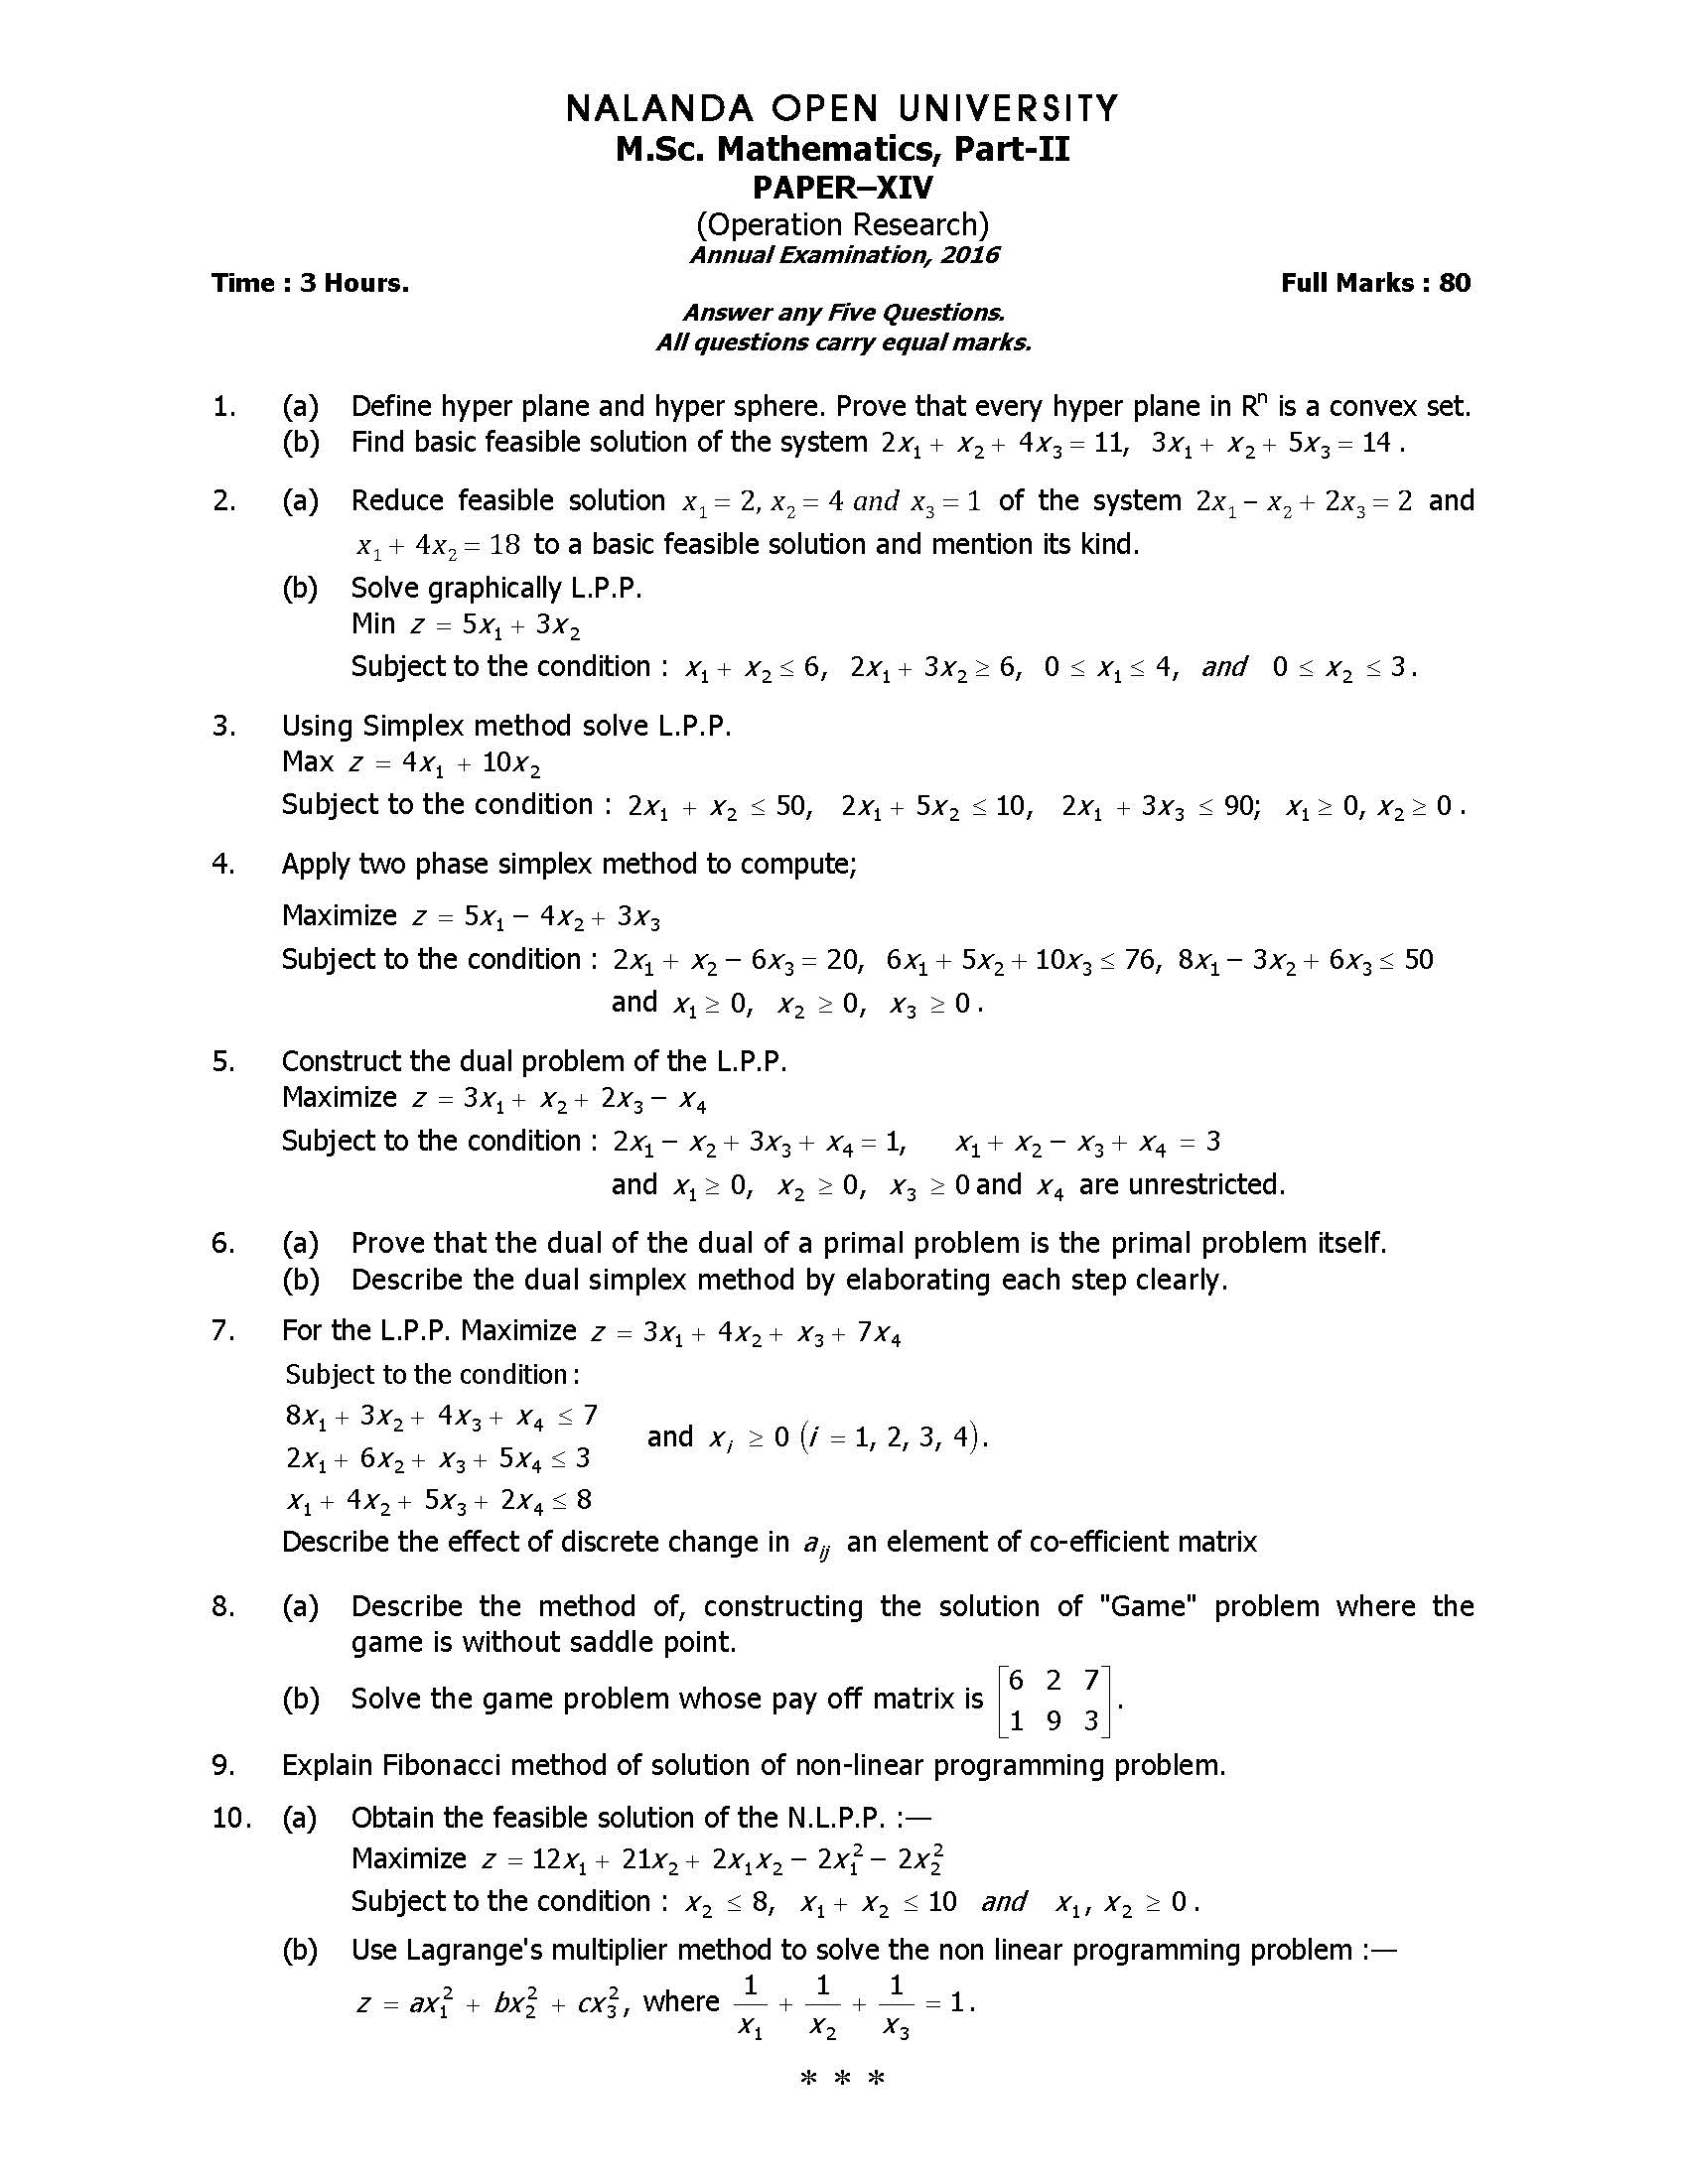 operation research previous year question paper